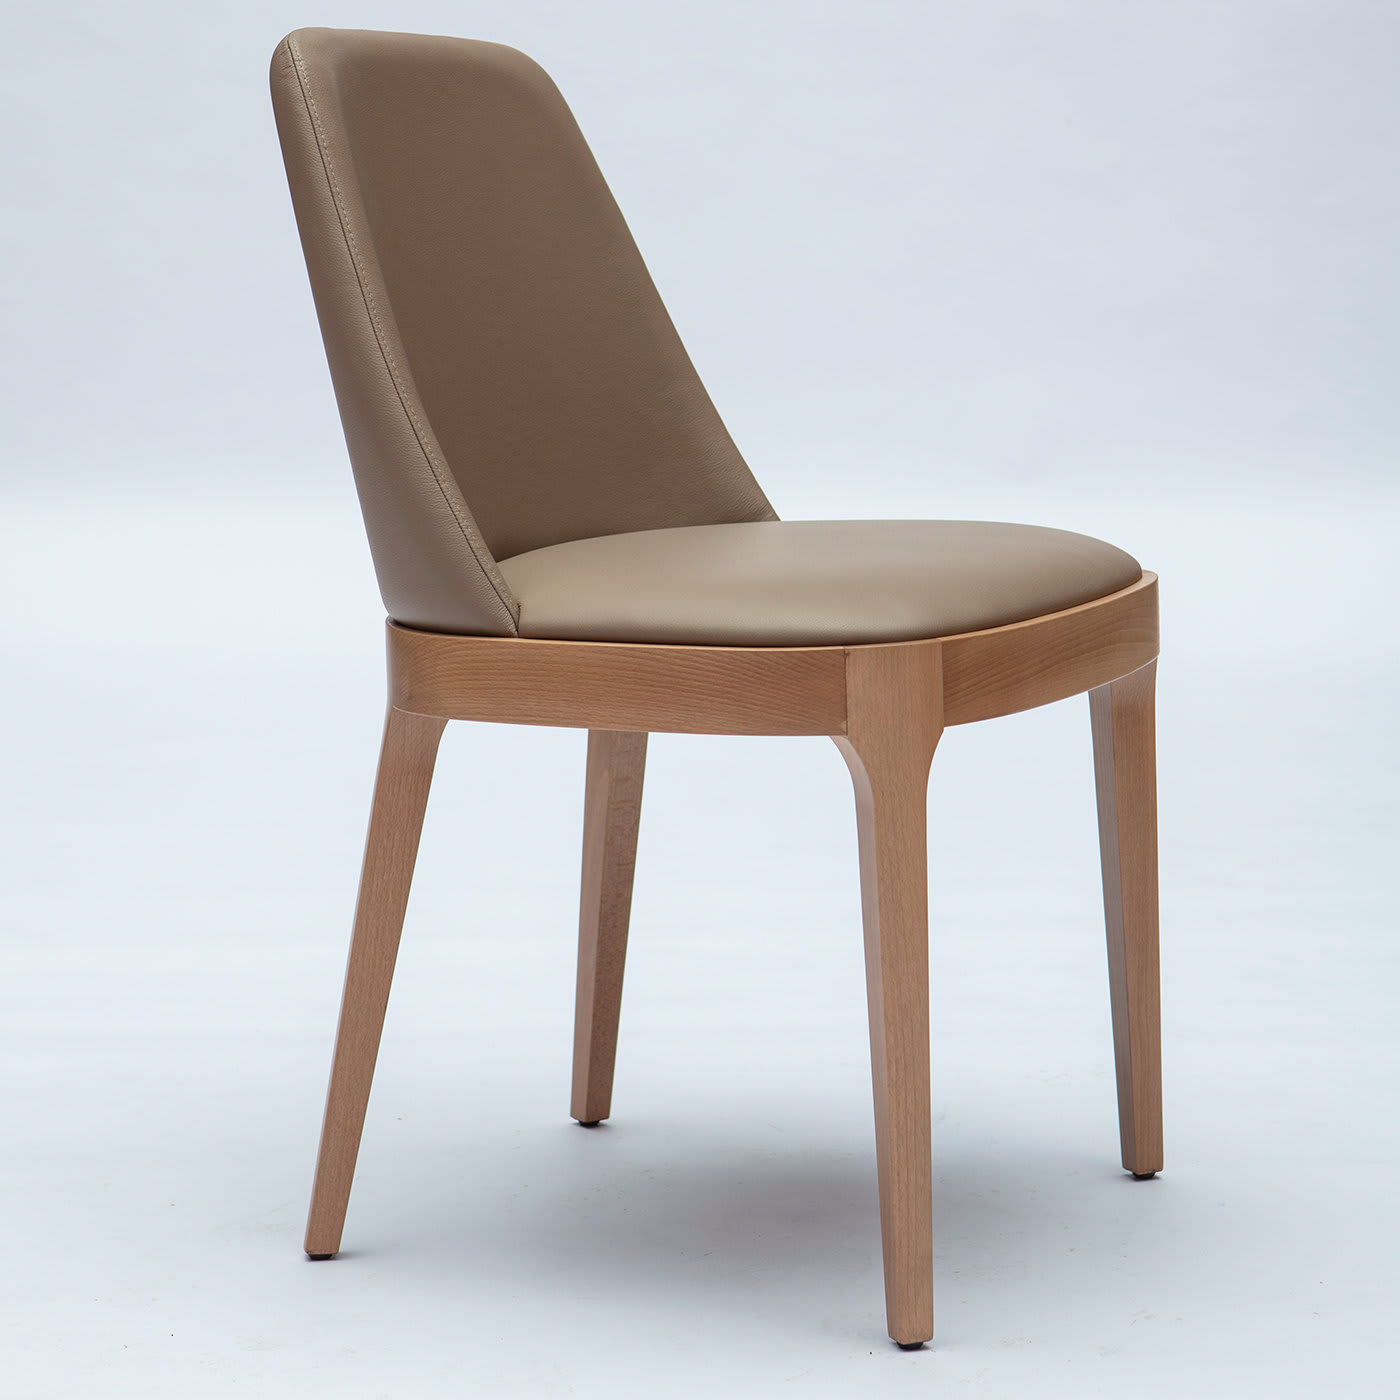 Club 24 leather dining chair - Livoni